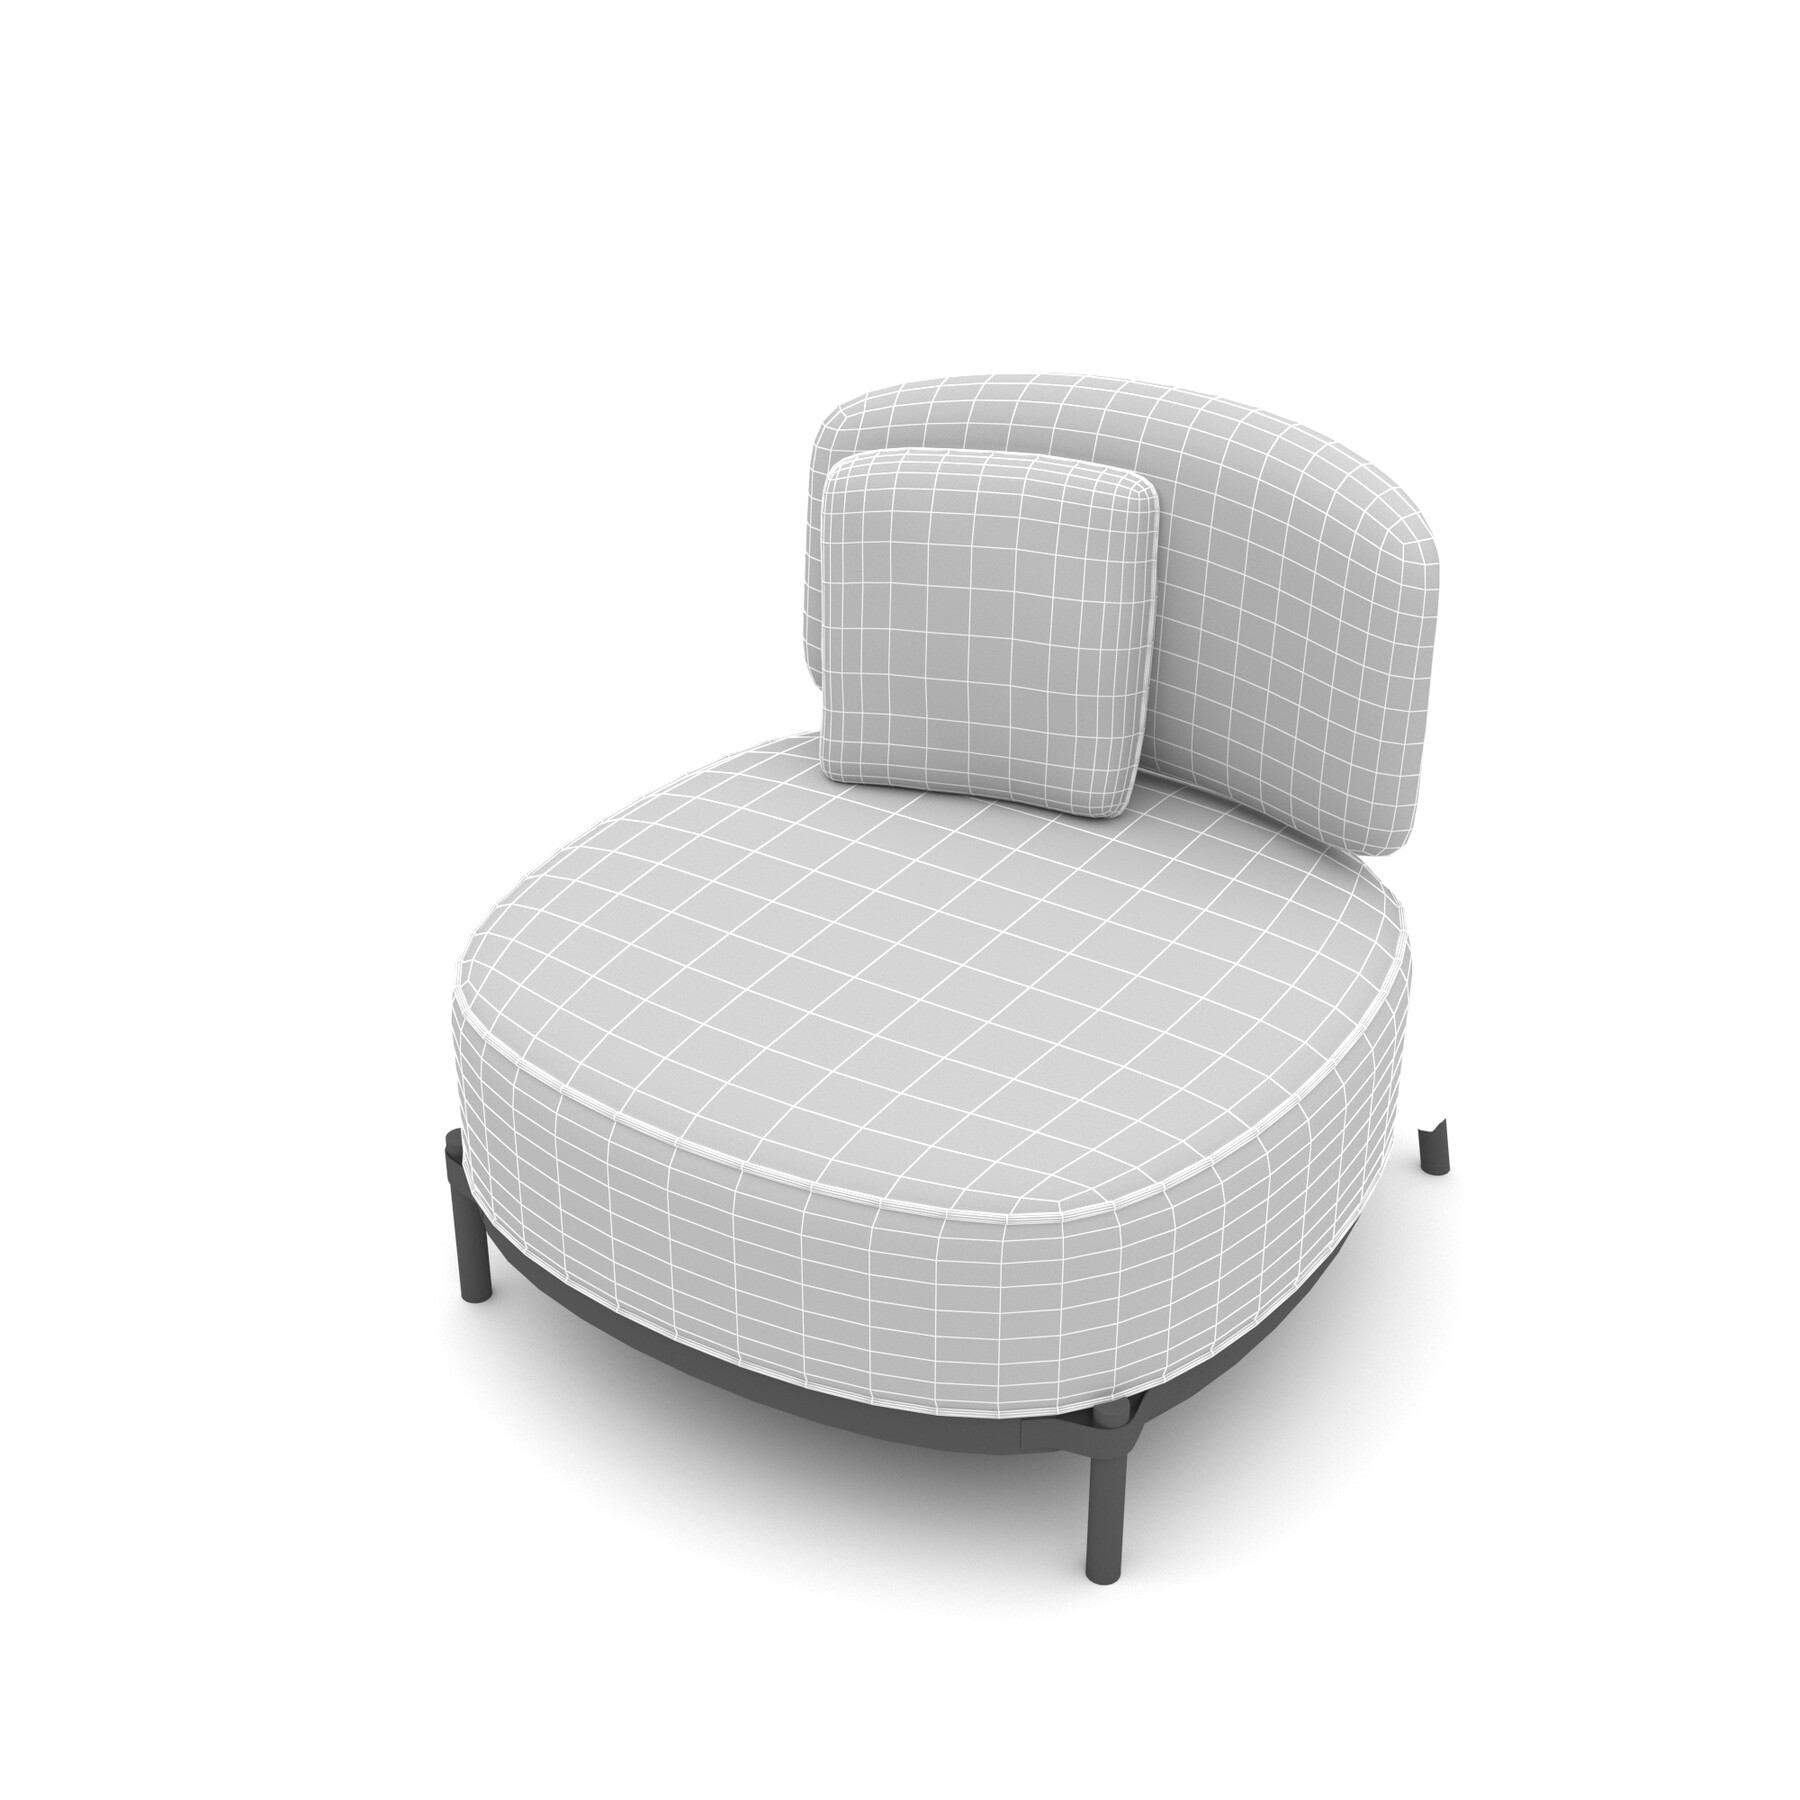 Louis Vuitton - Dolls Chair Type 2 - 3D Model for VRay, Corona